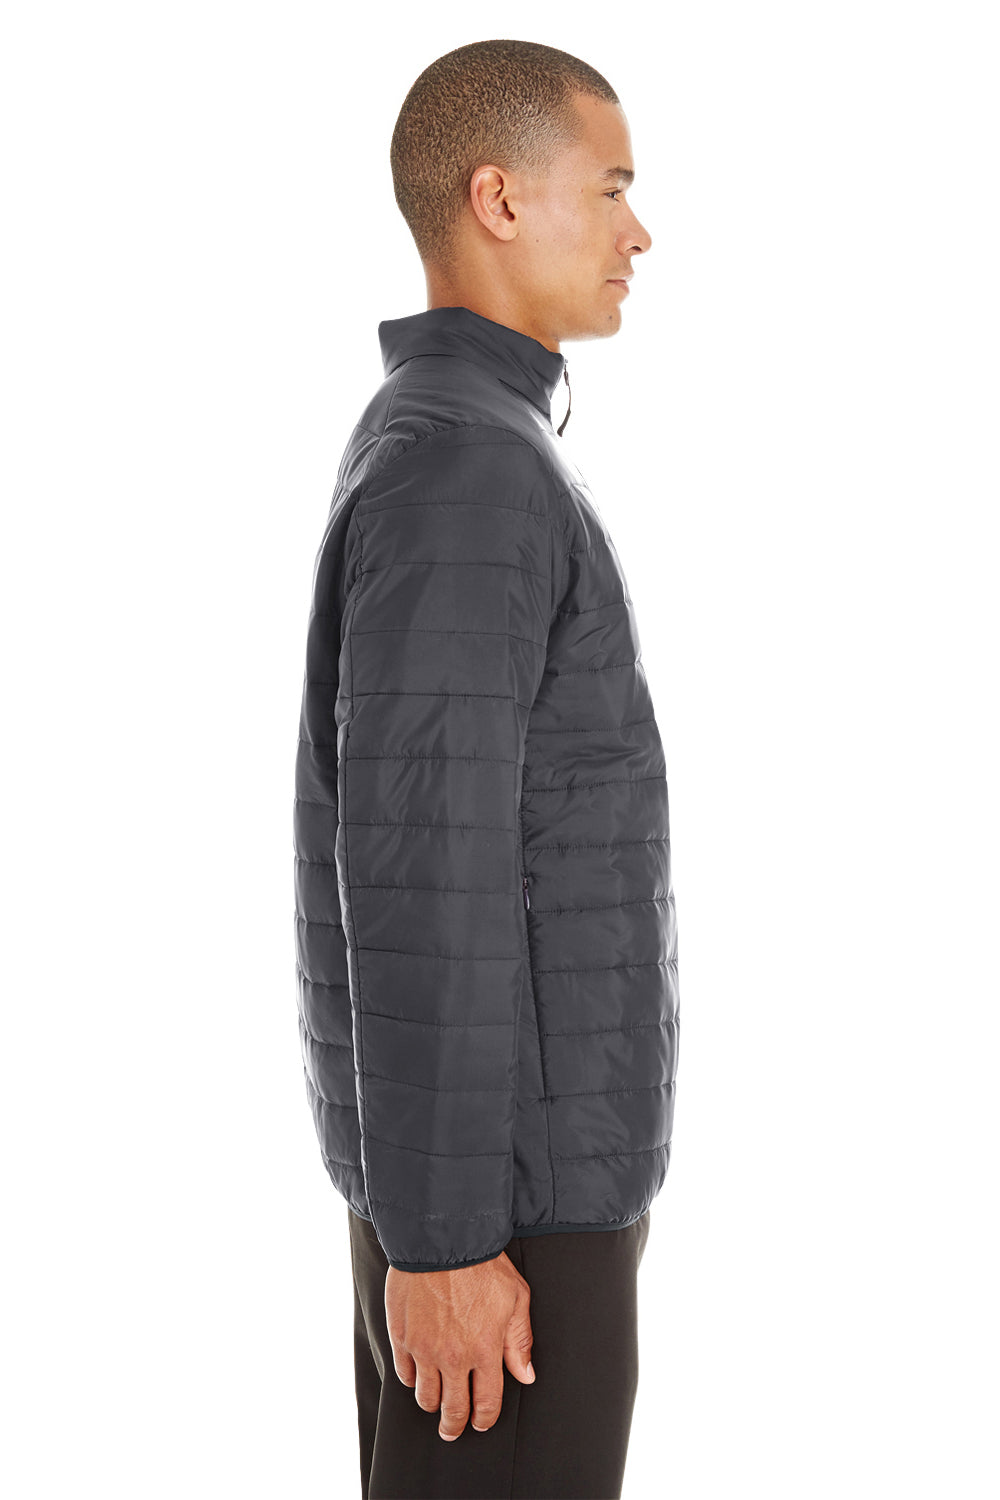 Core 365 CE700 Mens Prevail Packable Puffer Water Resistant Full Zip Jacket Carbon Grey Side